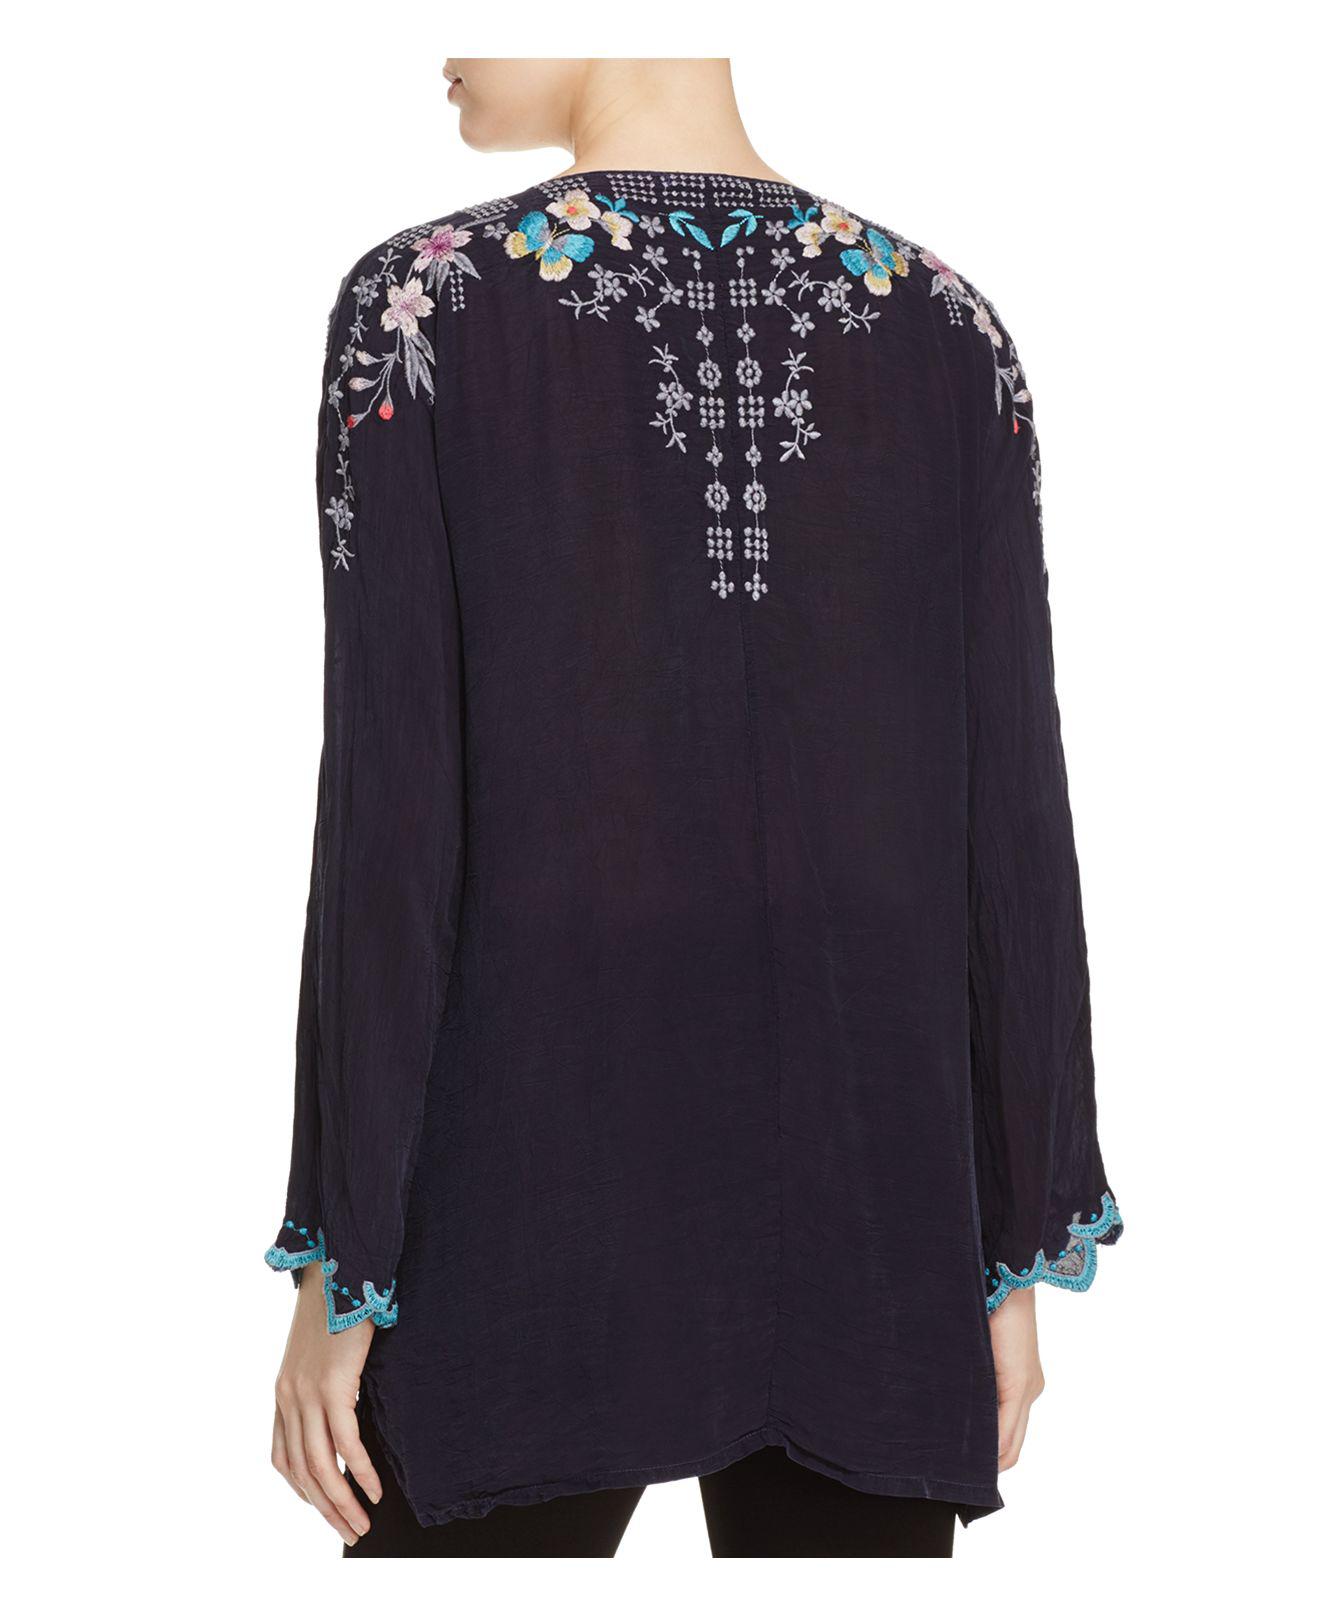 Lyst - Johnny Was Floral Embroidered Peasant Tunic in Blue